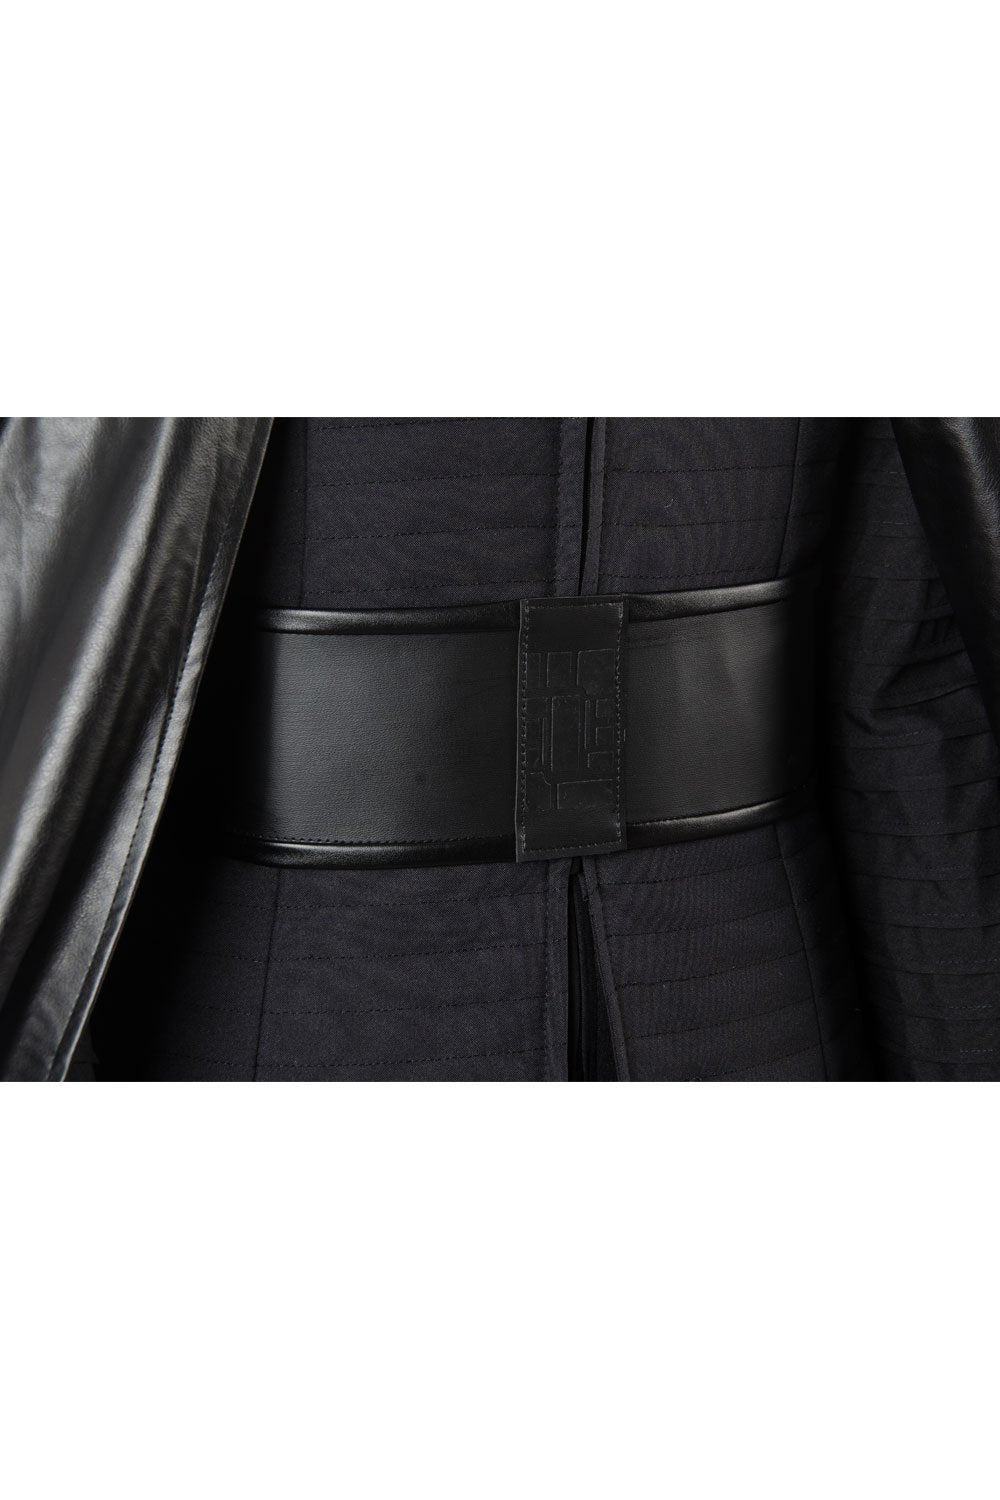 SeeCosplay The Last Jedi Kylo Ren Outfit Ver.2 Costume SWCostume